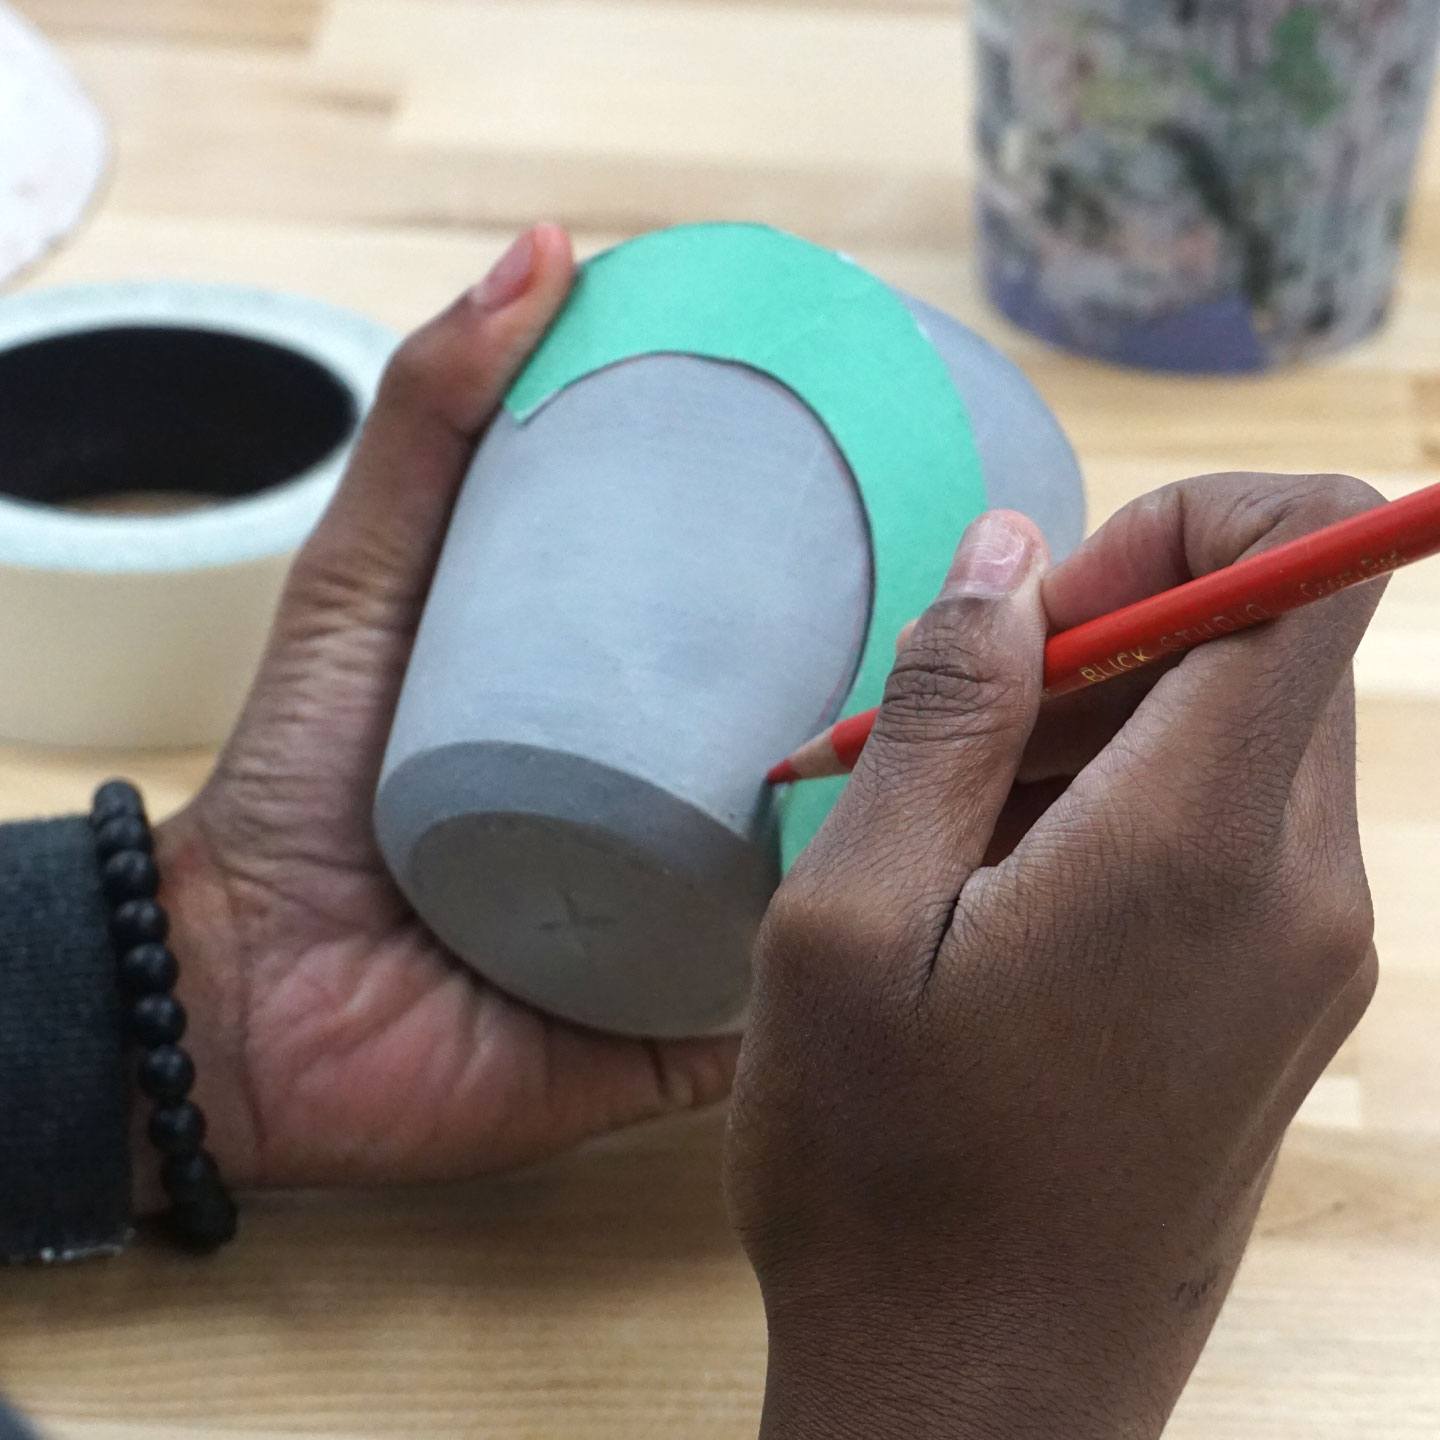 A student apprentice handling and decorating a ceramic cup.